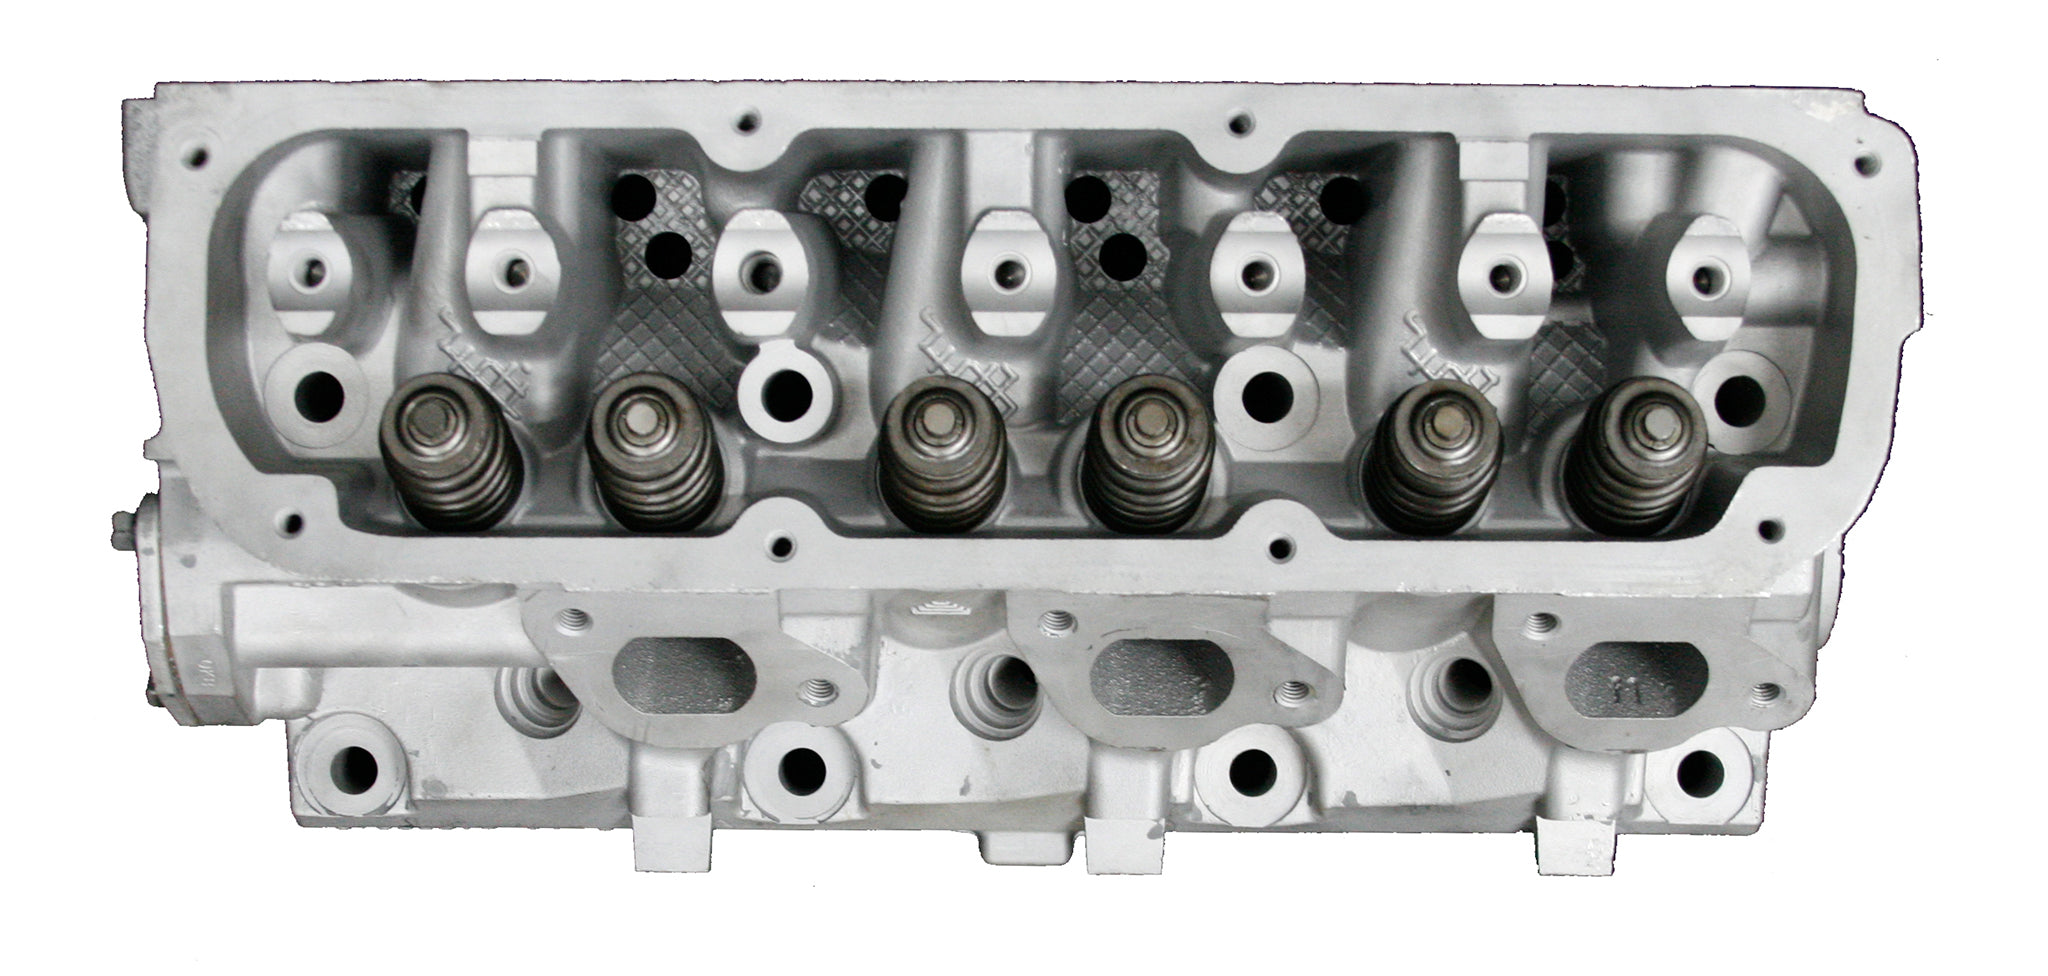 1998-2000 Chrysler Town,Country 3.8L SOHC Cylinder head Casting # 0466049AA-E